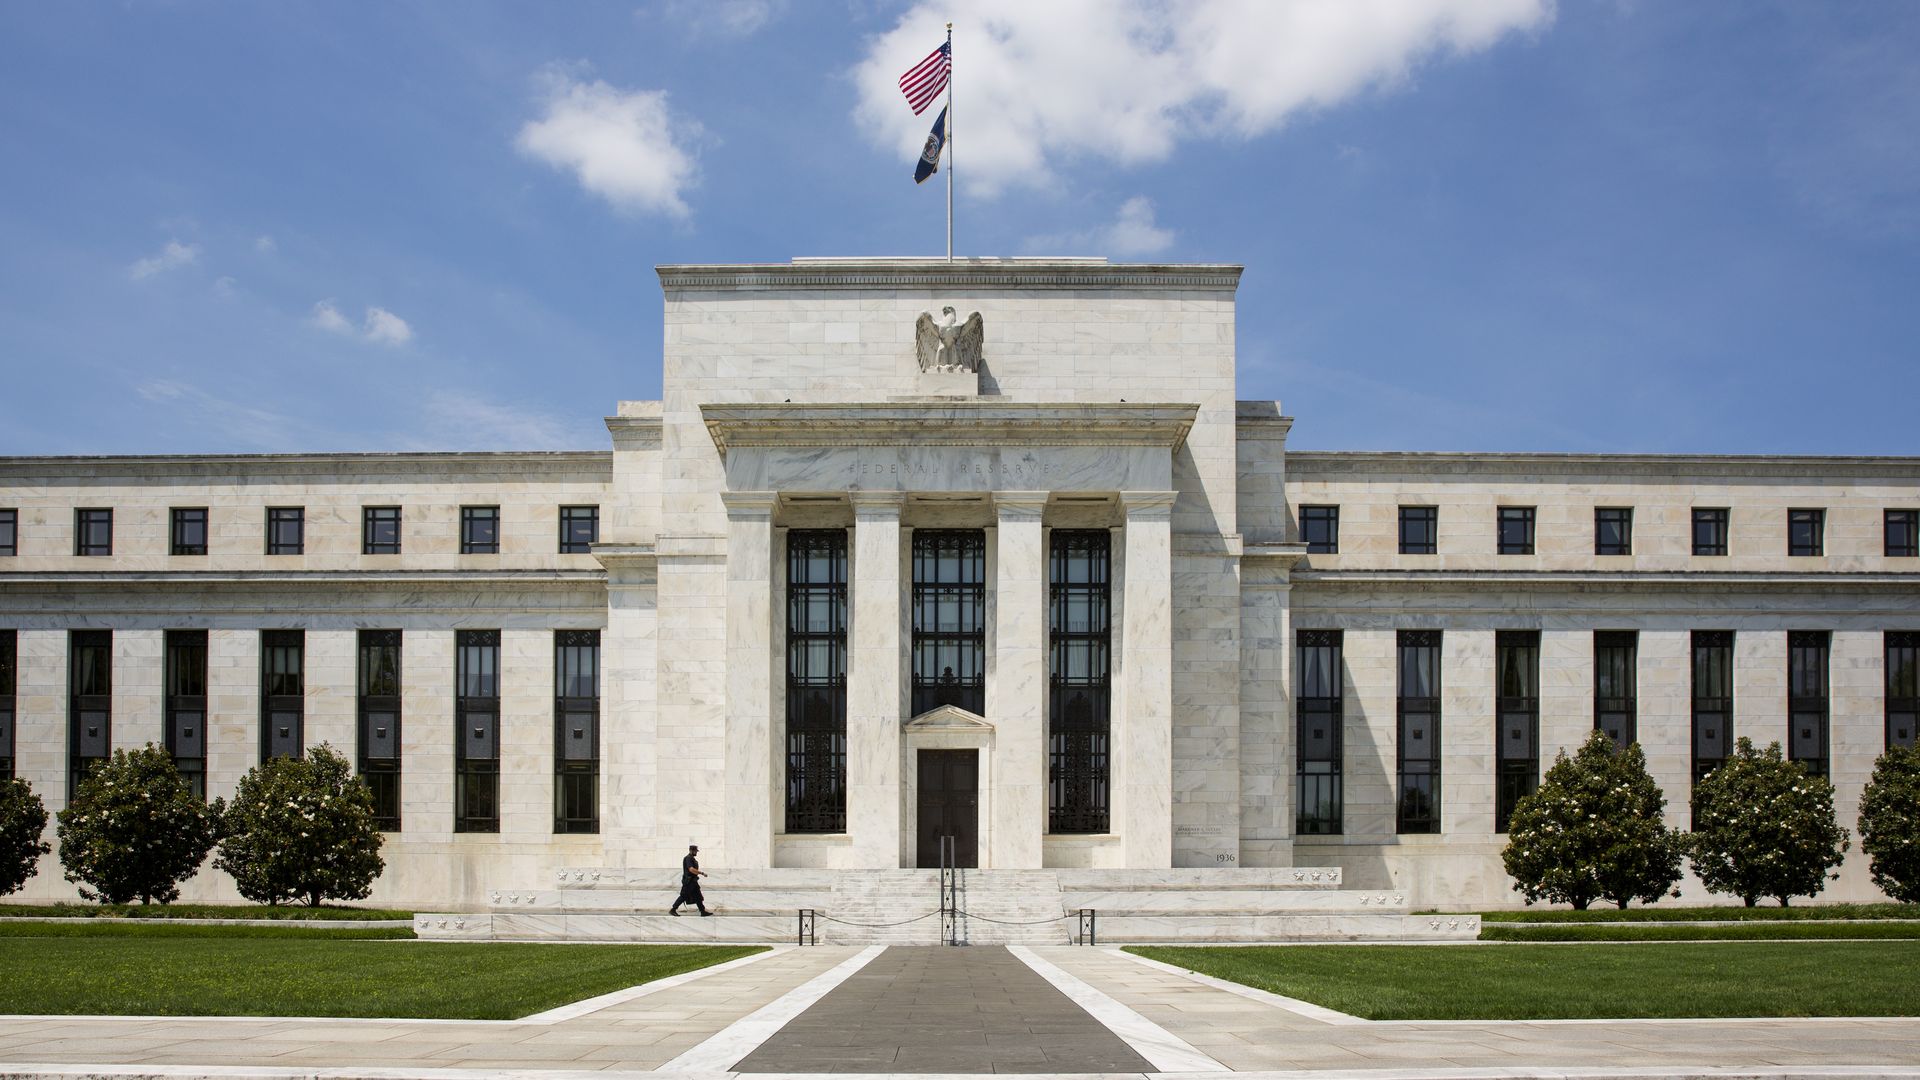 The Federal Reserve's headquarters building